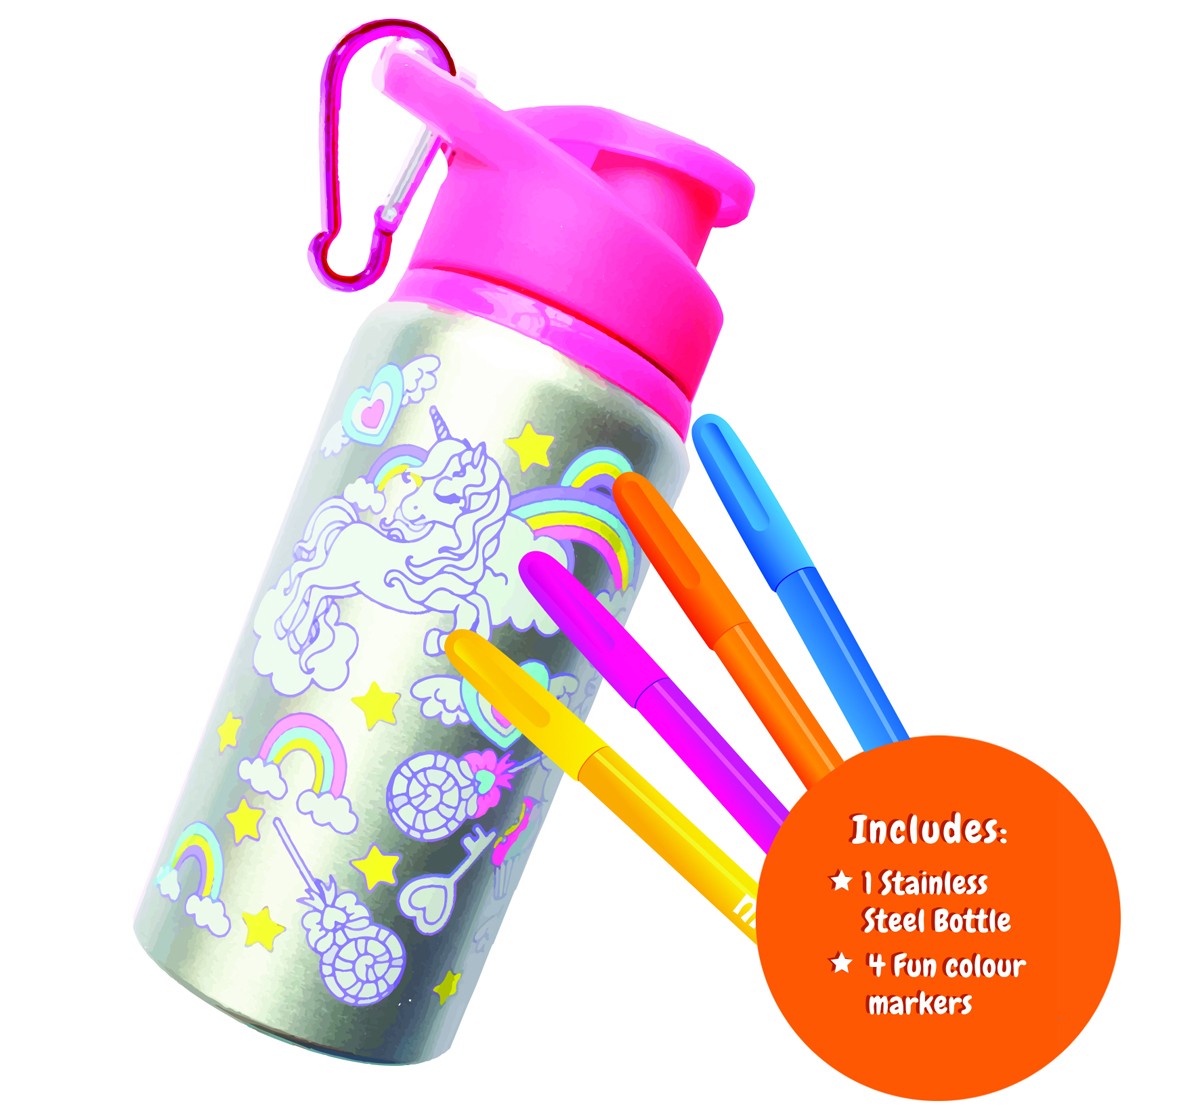 Colour Your Own Unicorn Stainless Steel Water Bottle by Mirada for Kids with 4 Fun Colour Markers, 6 Yrs +